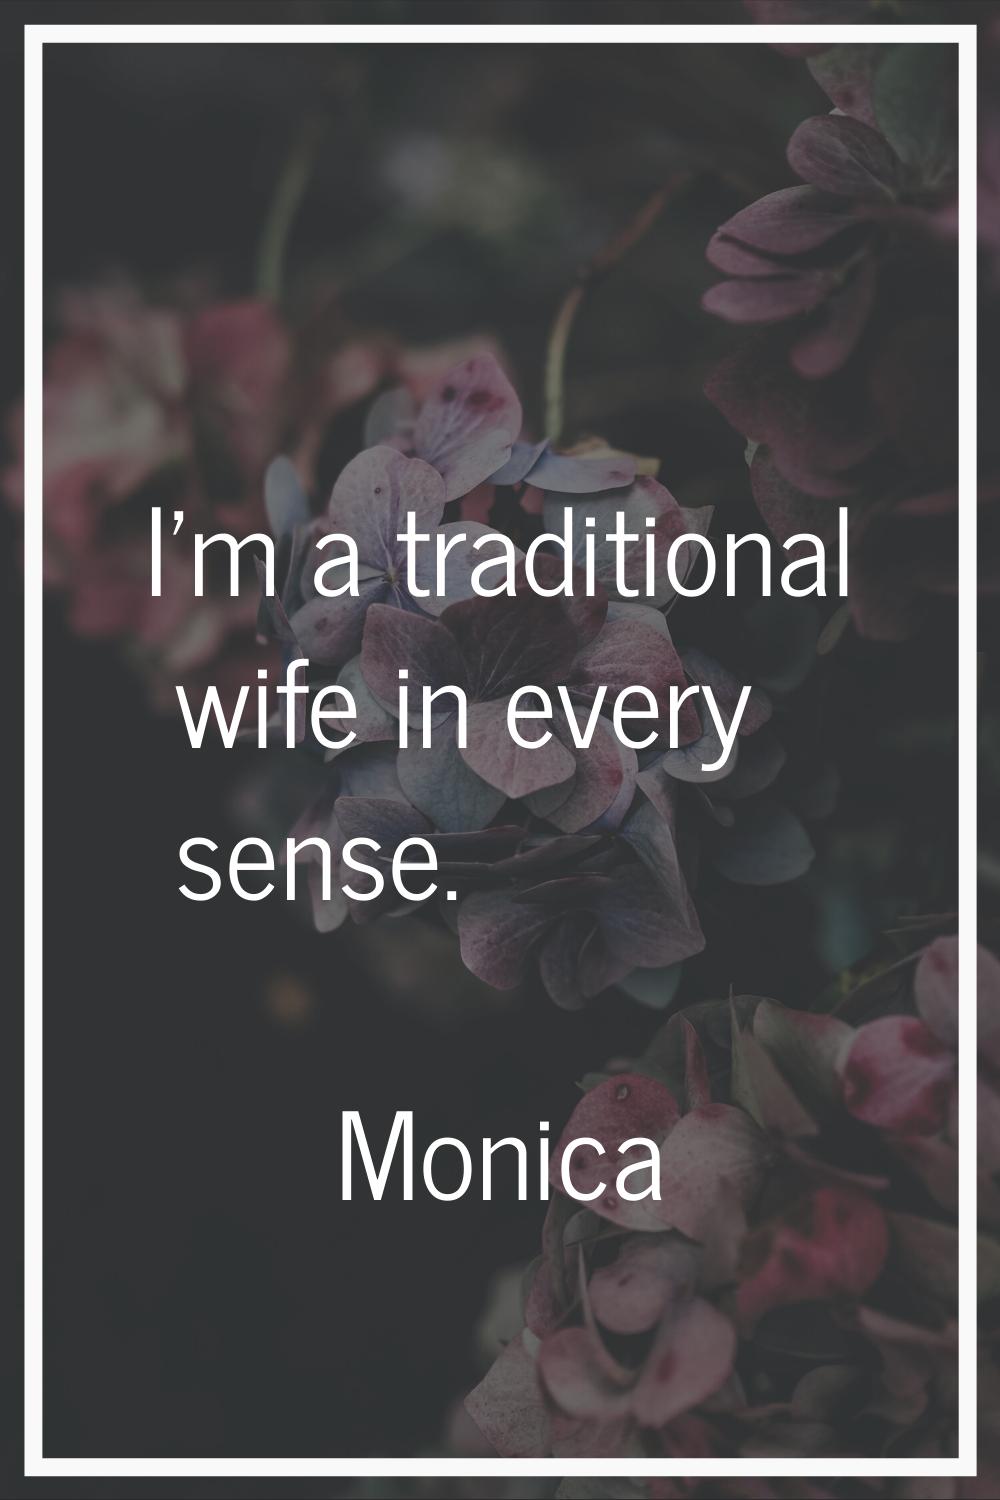 I'm a traditional wife in every sense.